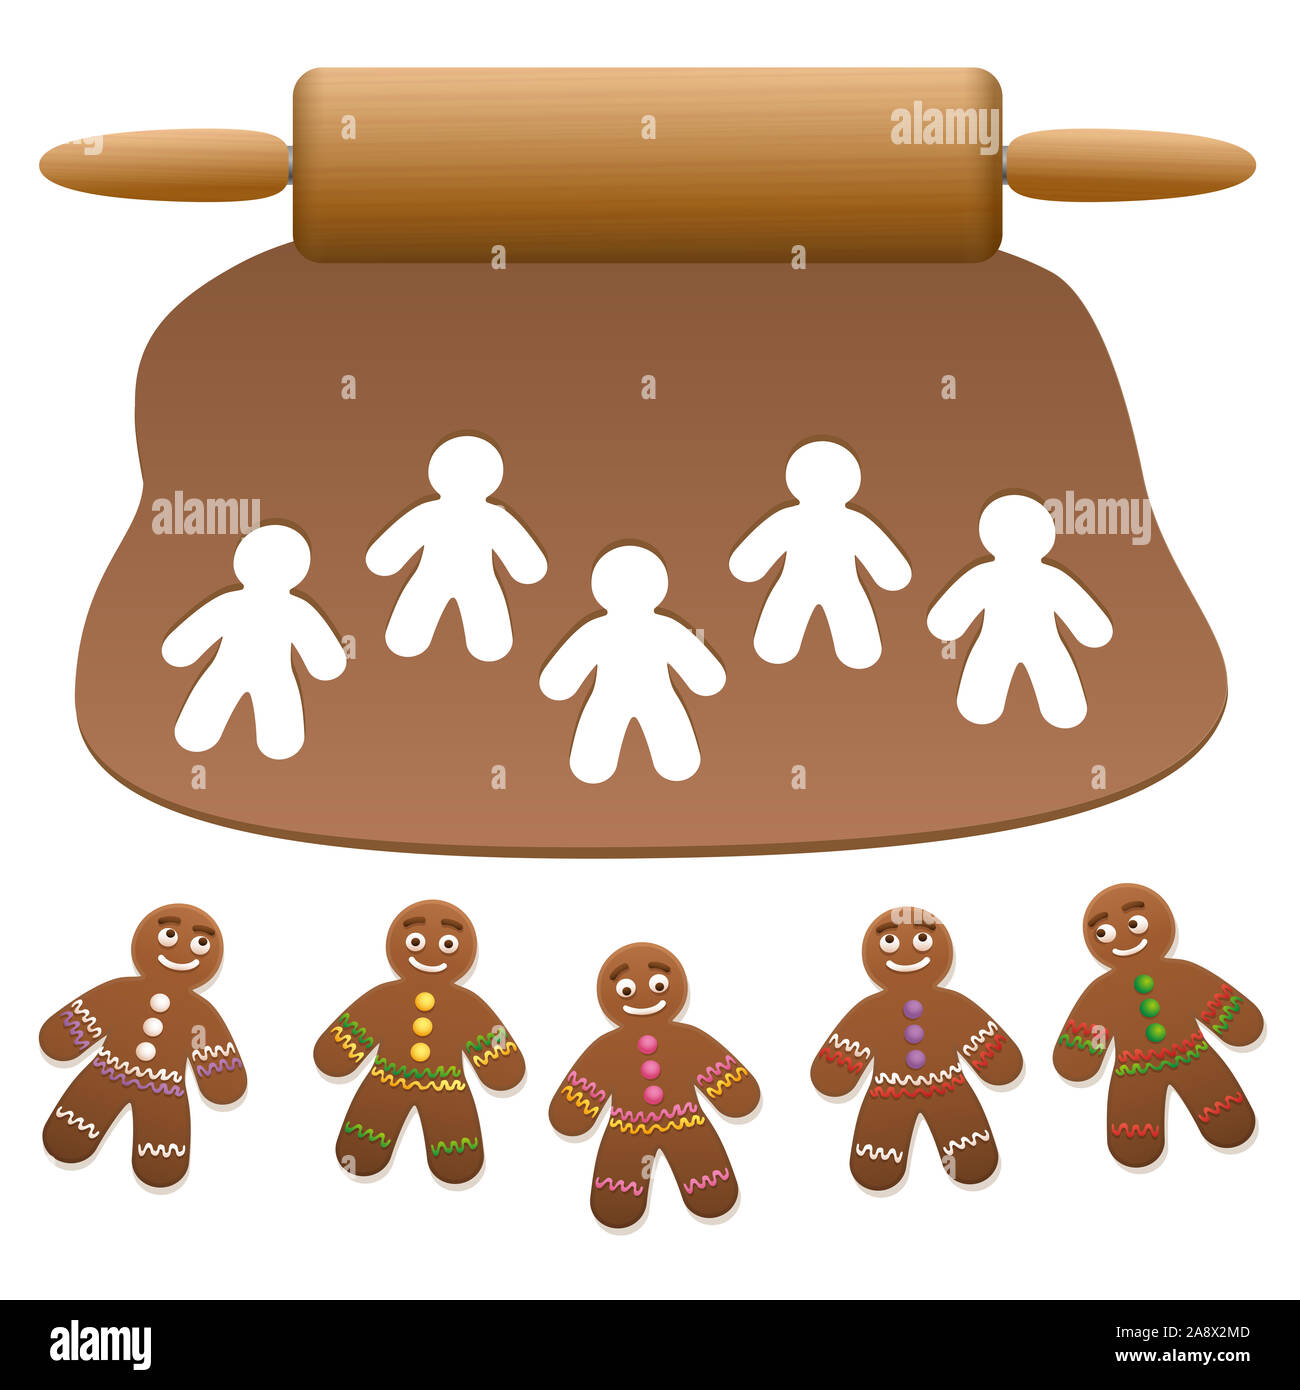 Gingerbread man group. Lebkuchen dough with wooden rolling pin and cut out gingerbread cookies - illustration on white background. Stock Photo